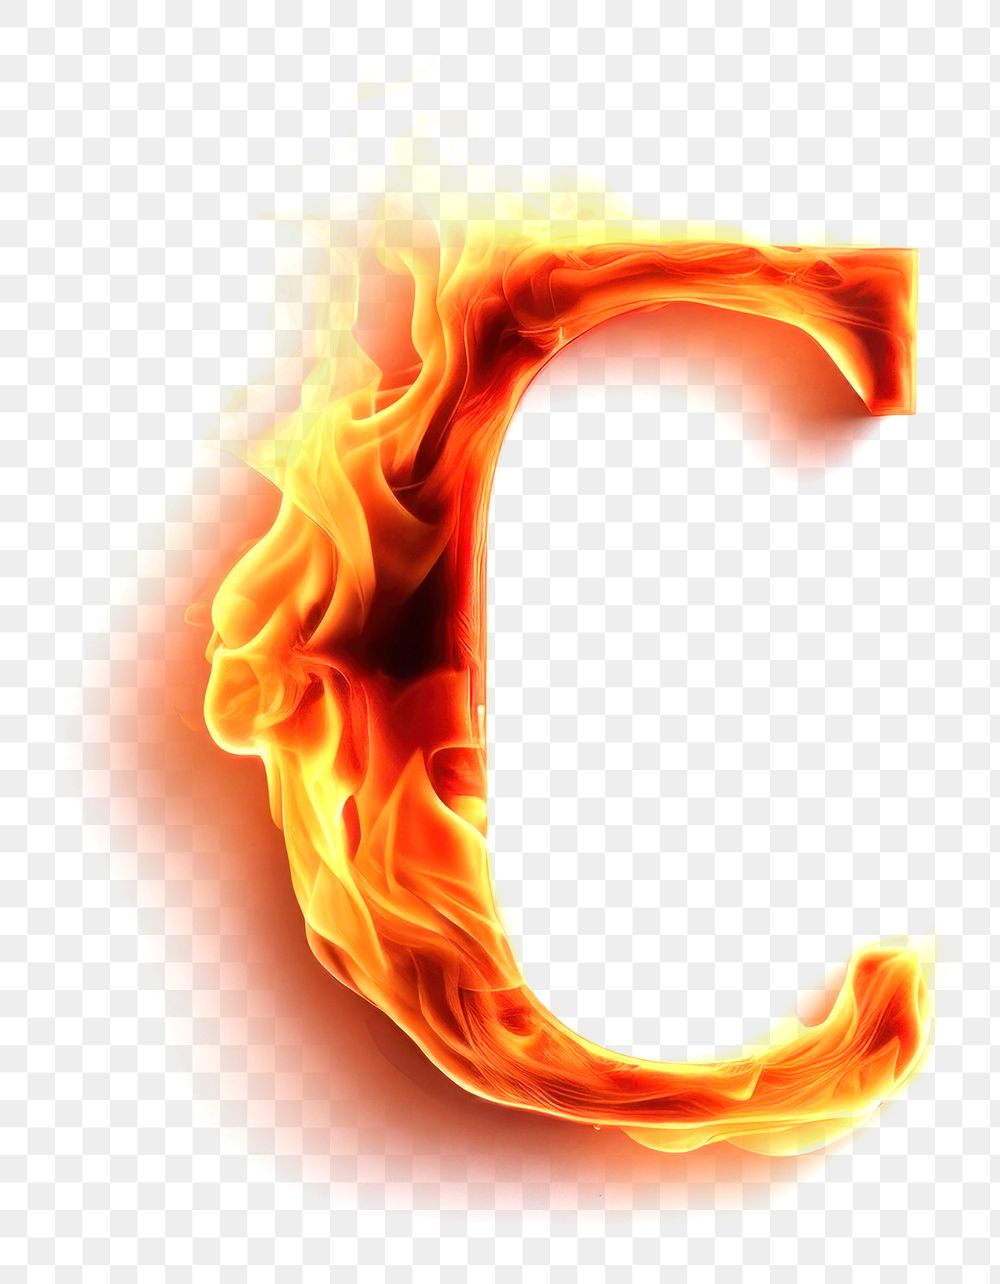 Burning letter C fire glowing burning.